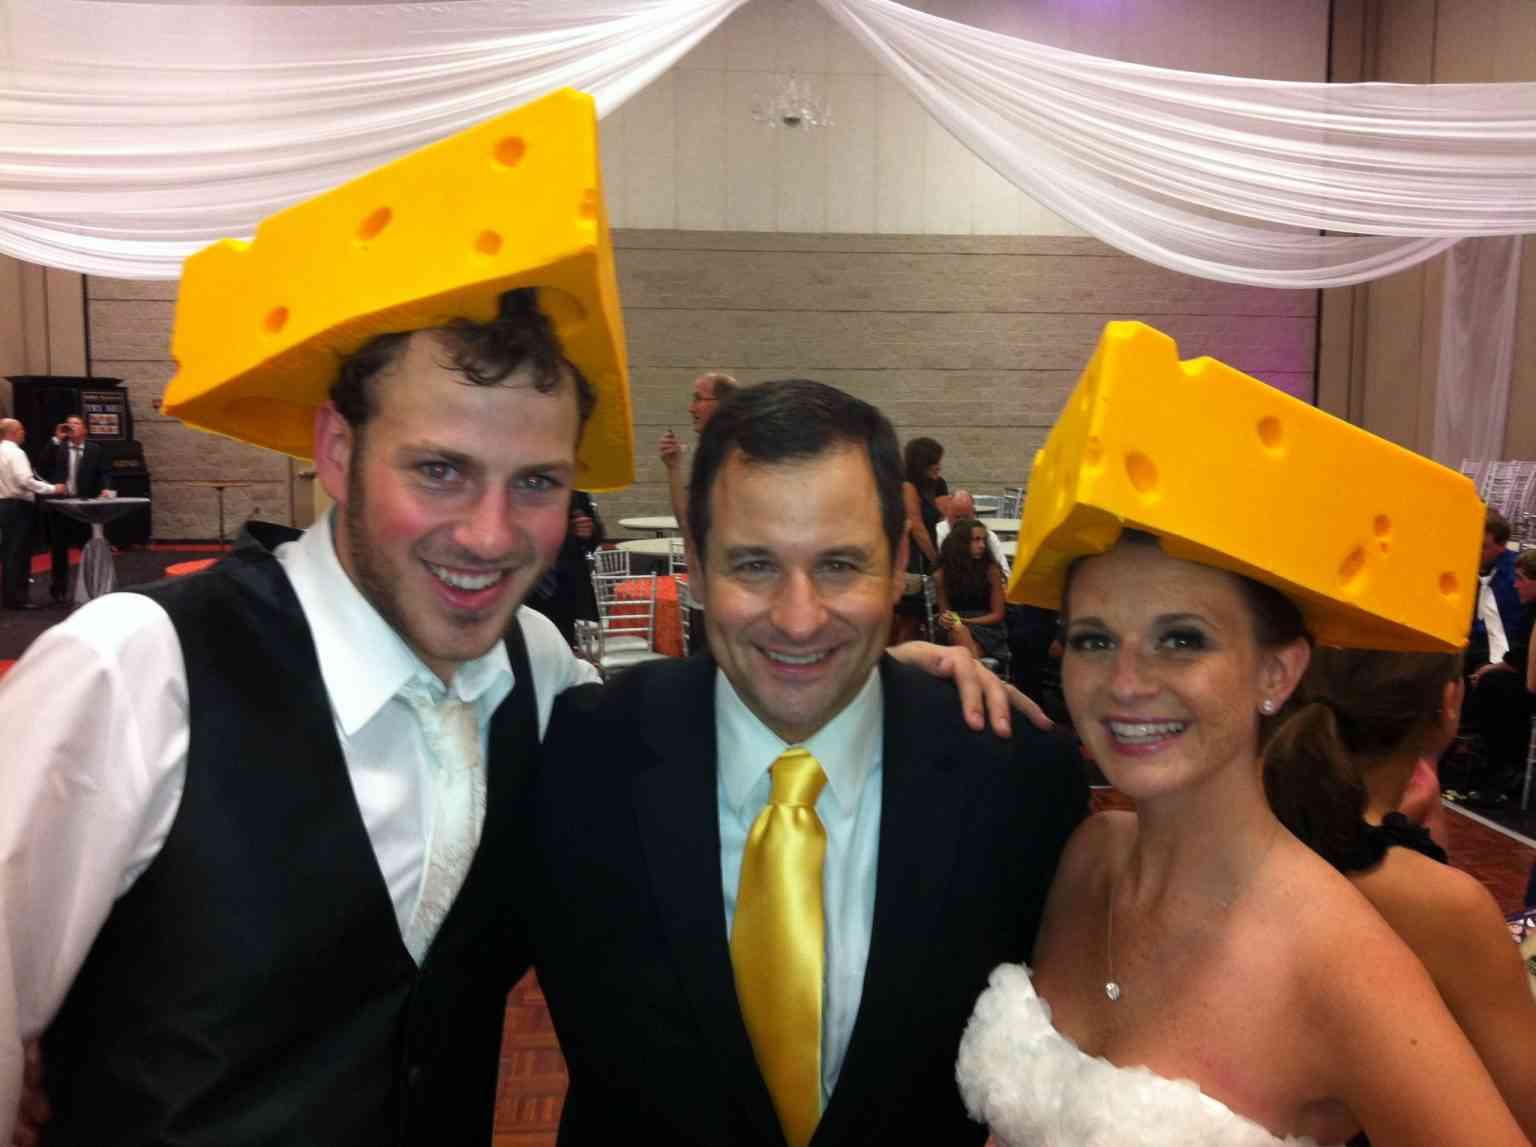 David with couple in cheese hats